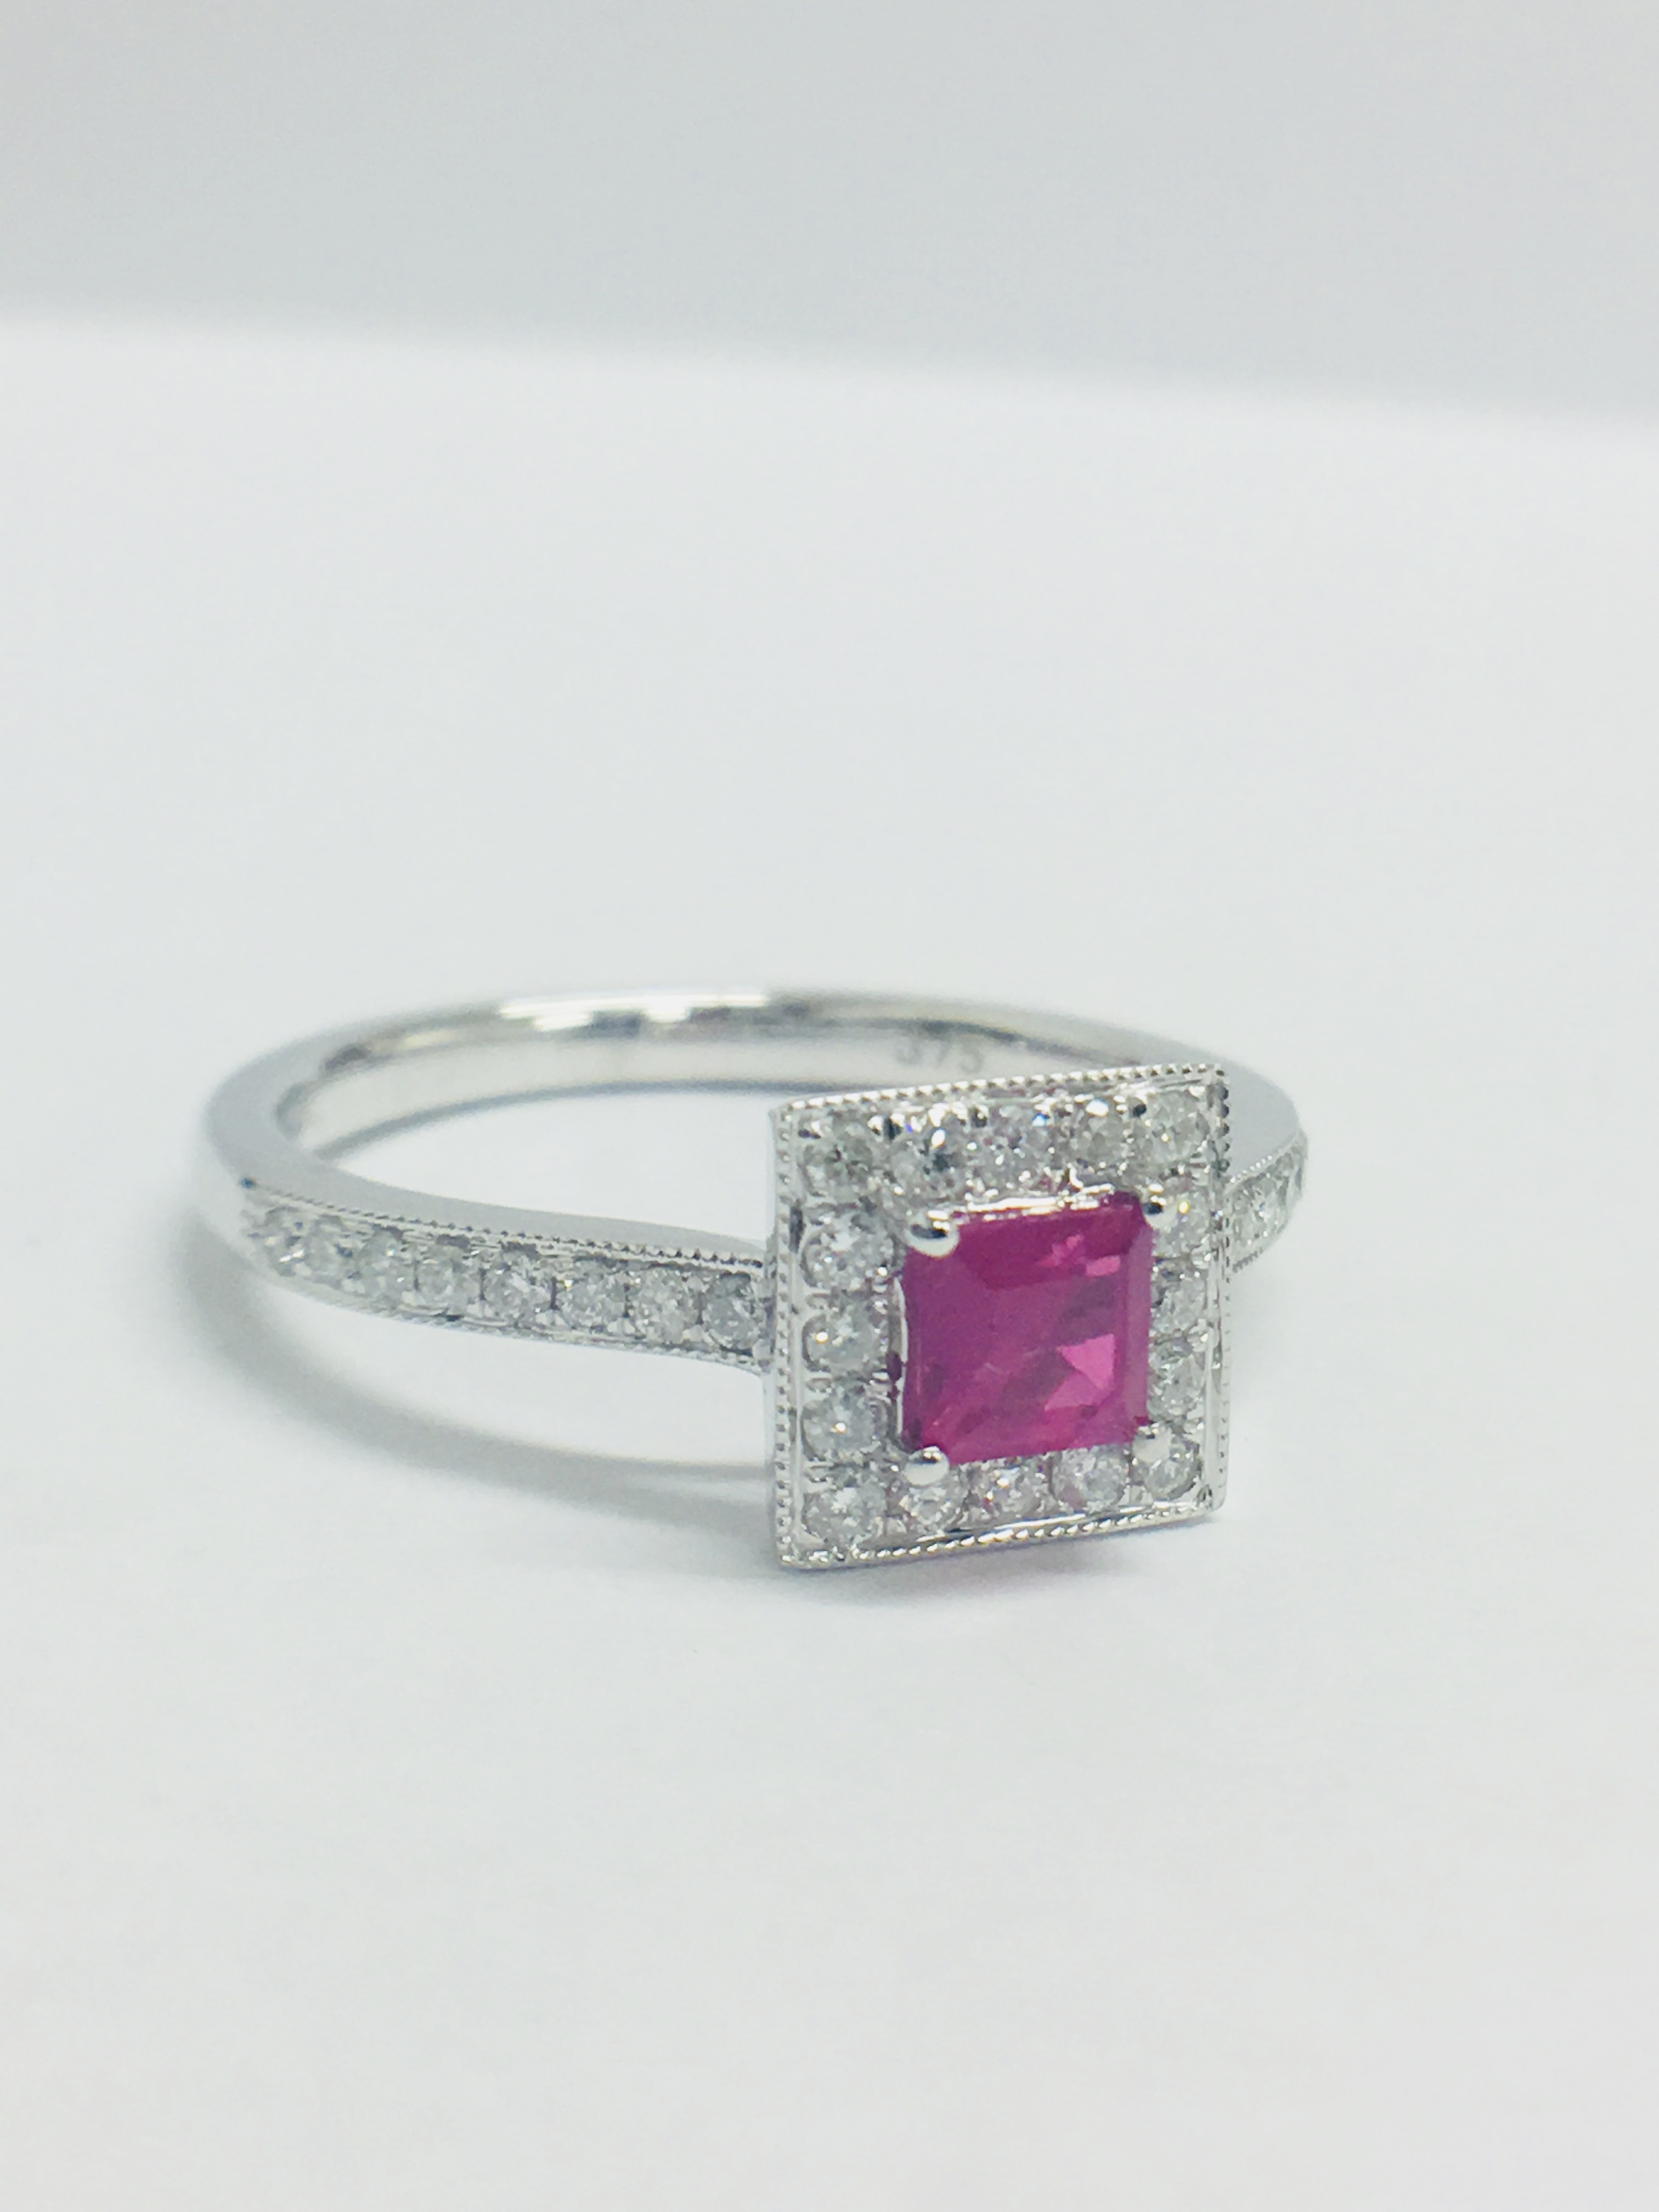 9Ct White Gold Ruby Diamond Cluster Ring, - Image 8 of 8